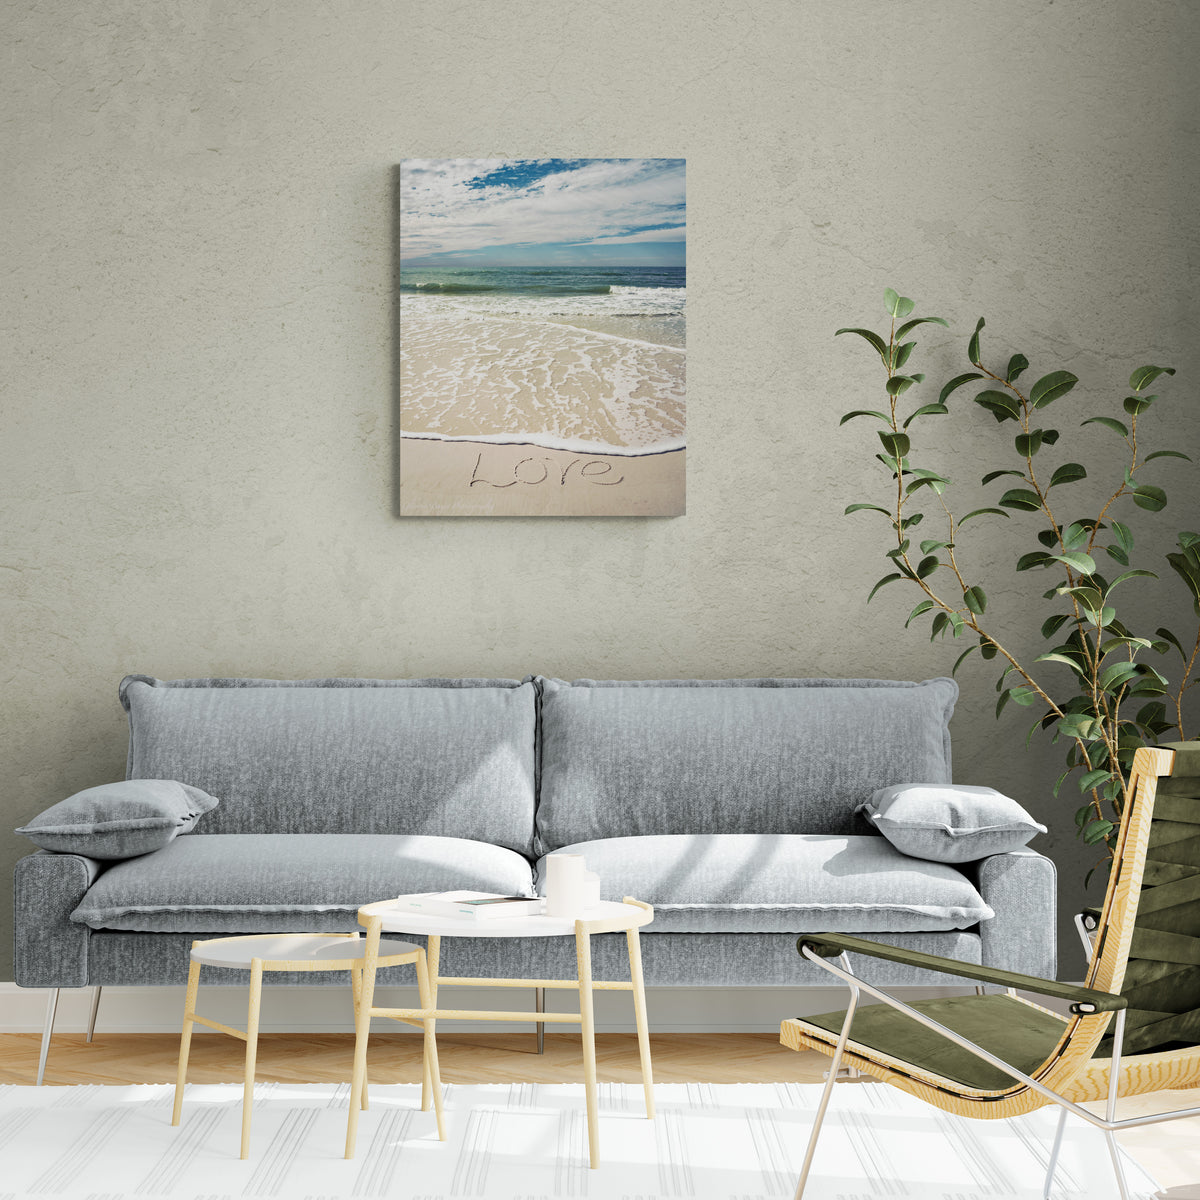 print displayed on wall in living room